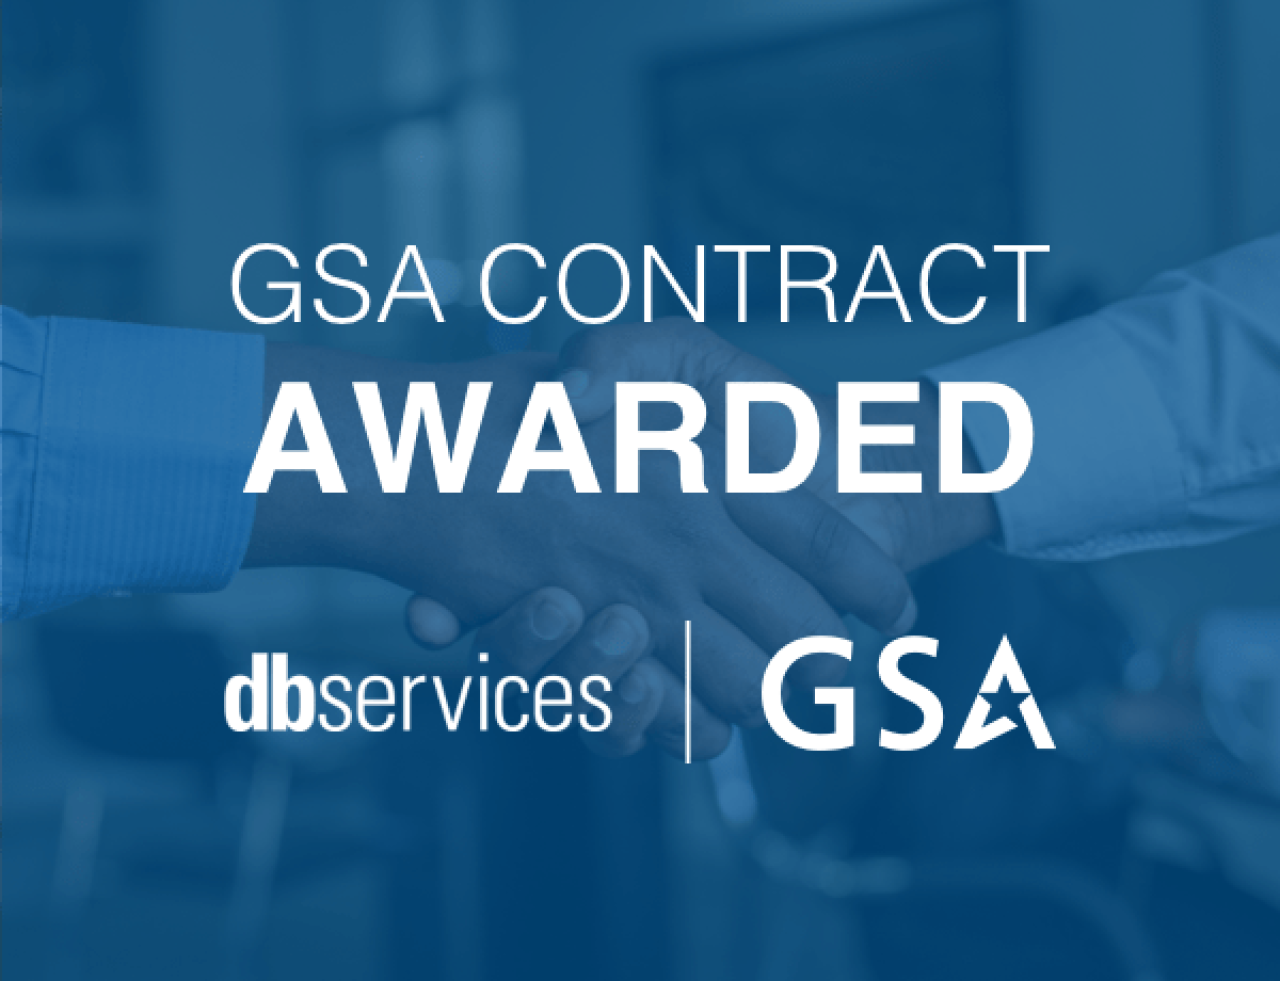 GSA Contract Awarded to DB Services.